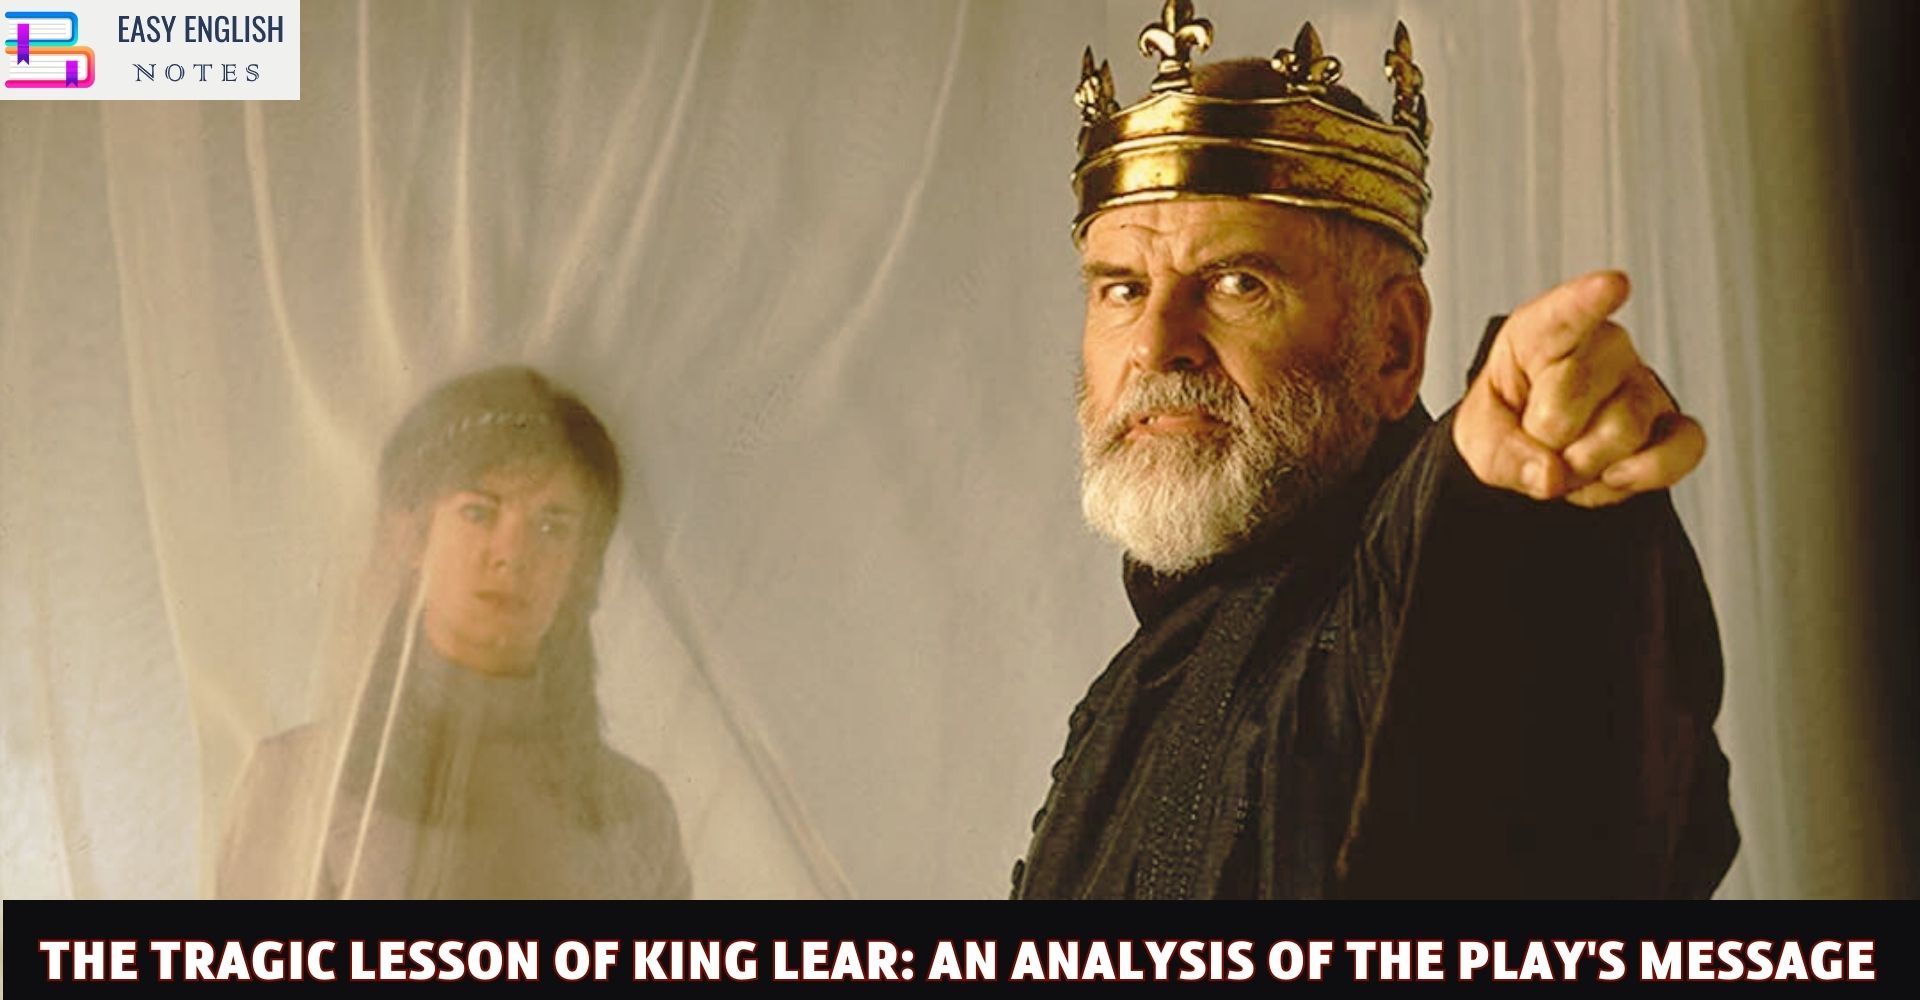 The Tragic Lesson of King Lear: An Analysis of the Play's Message